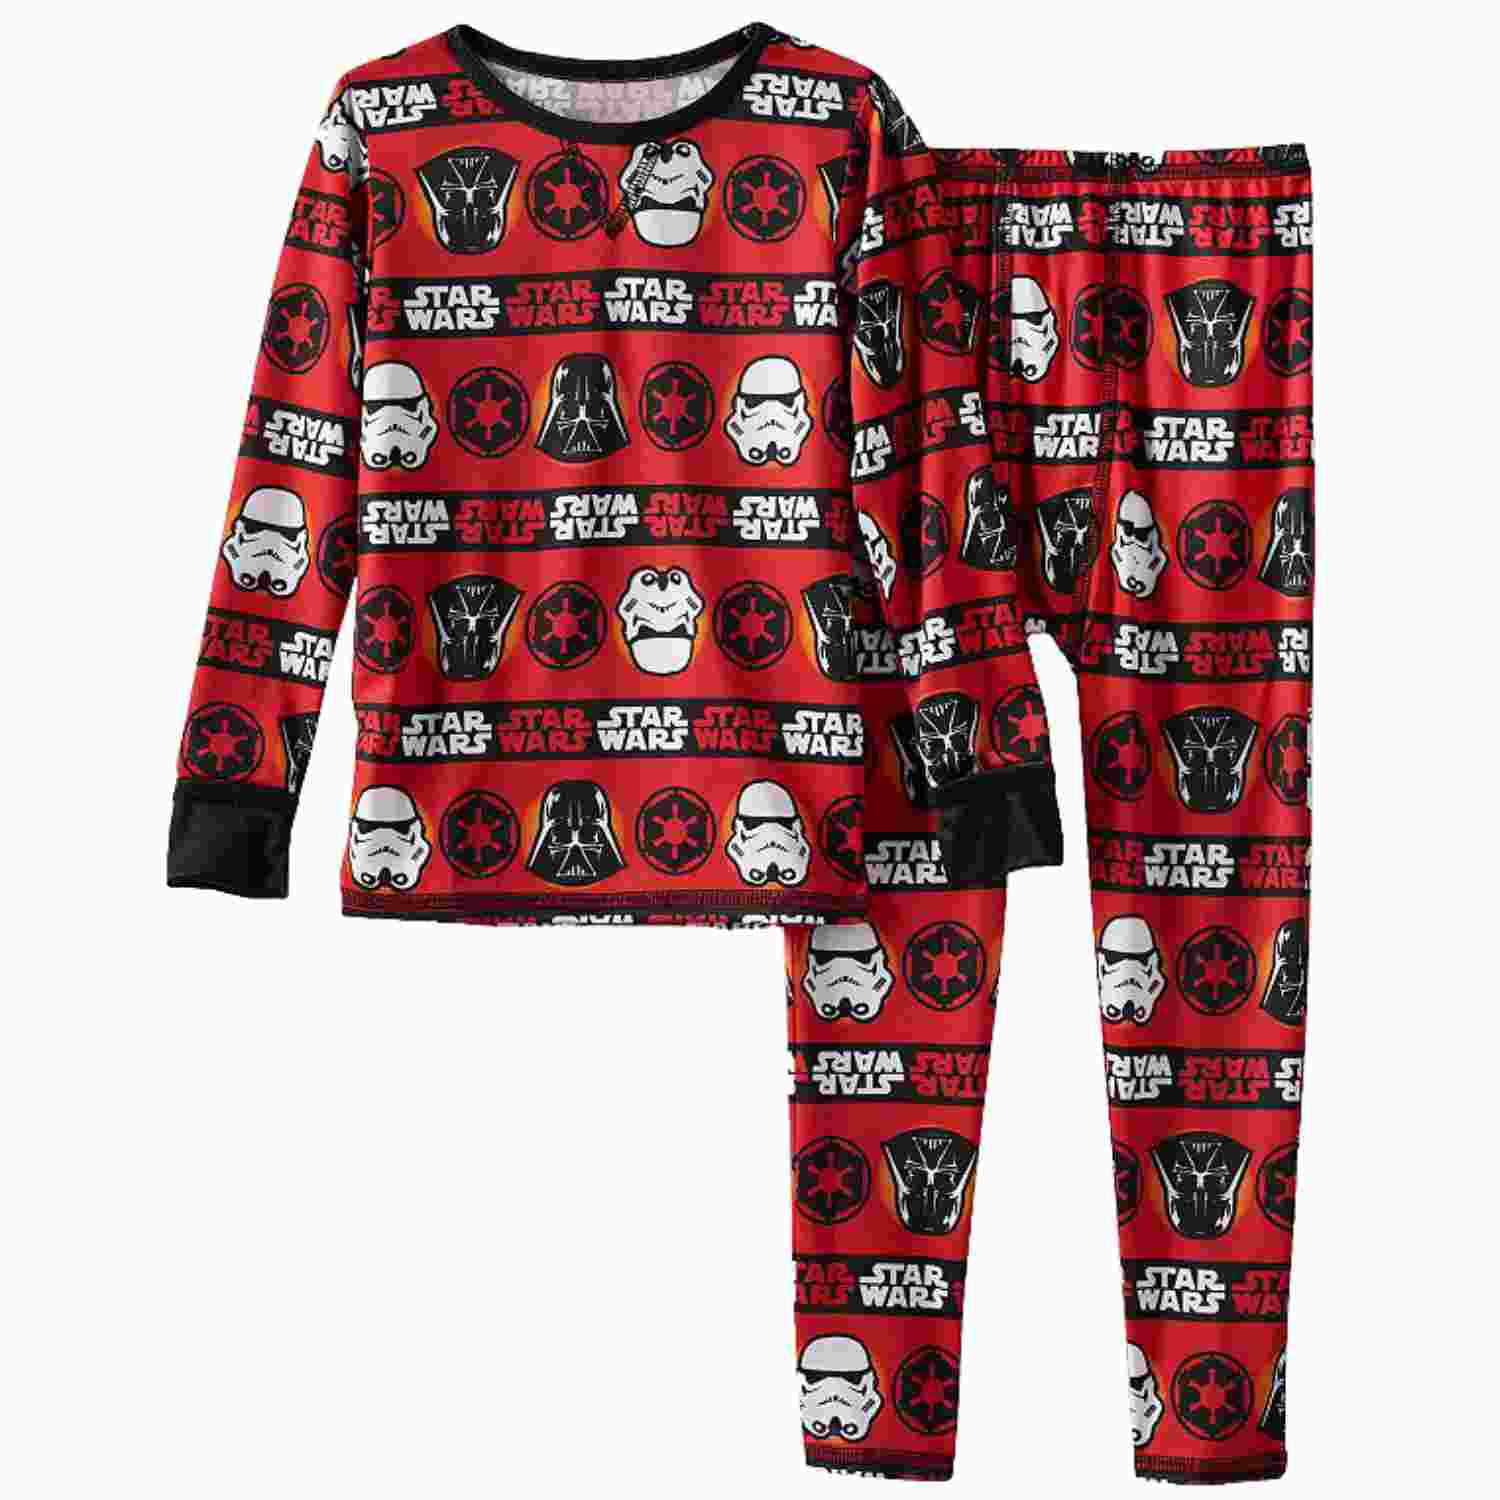 NWT Cuddl Duds Red STAR WARS 2 Pc Comfortech Poly BASE LAYER Long Johns 2T-3T 